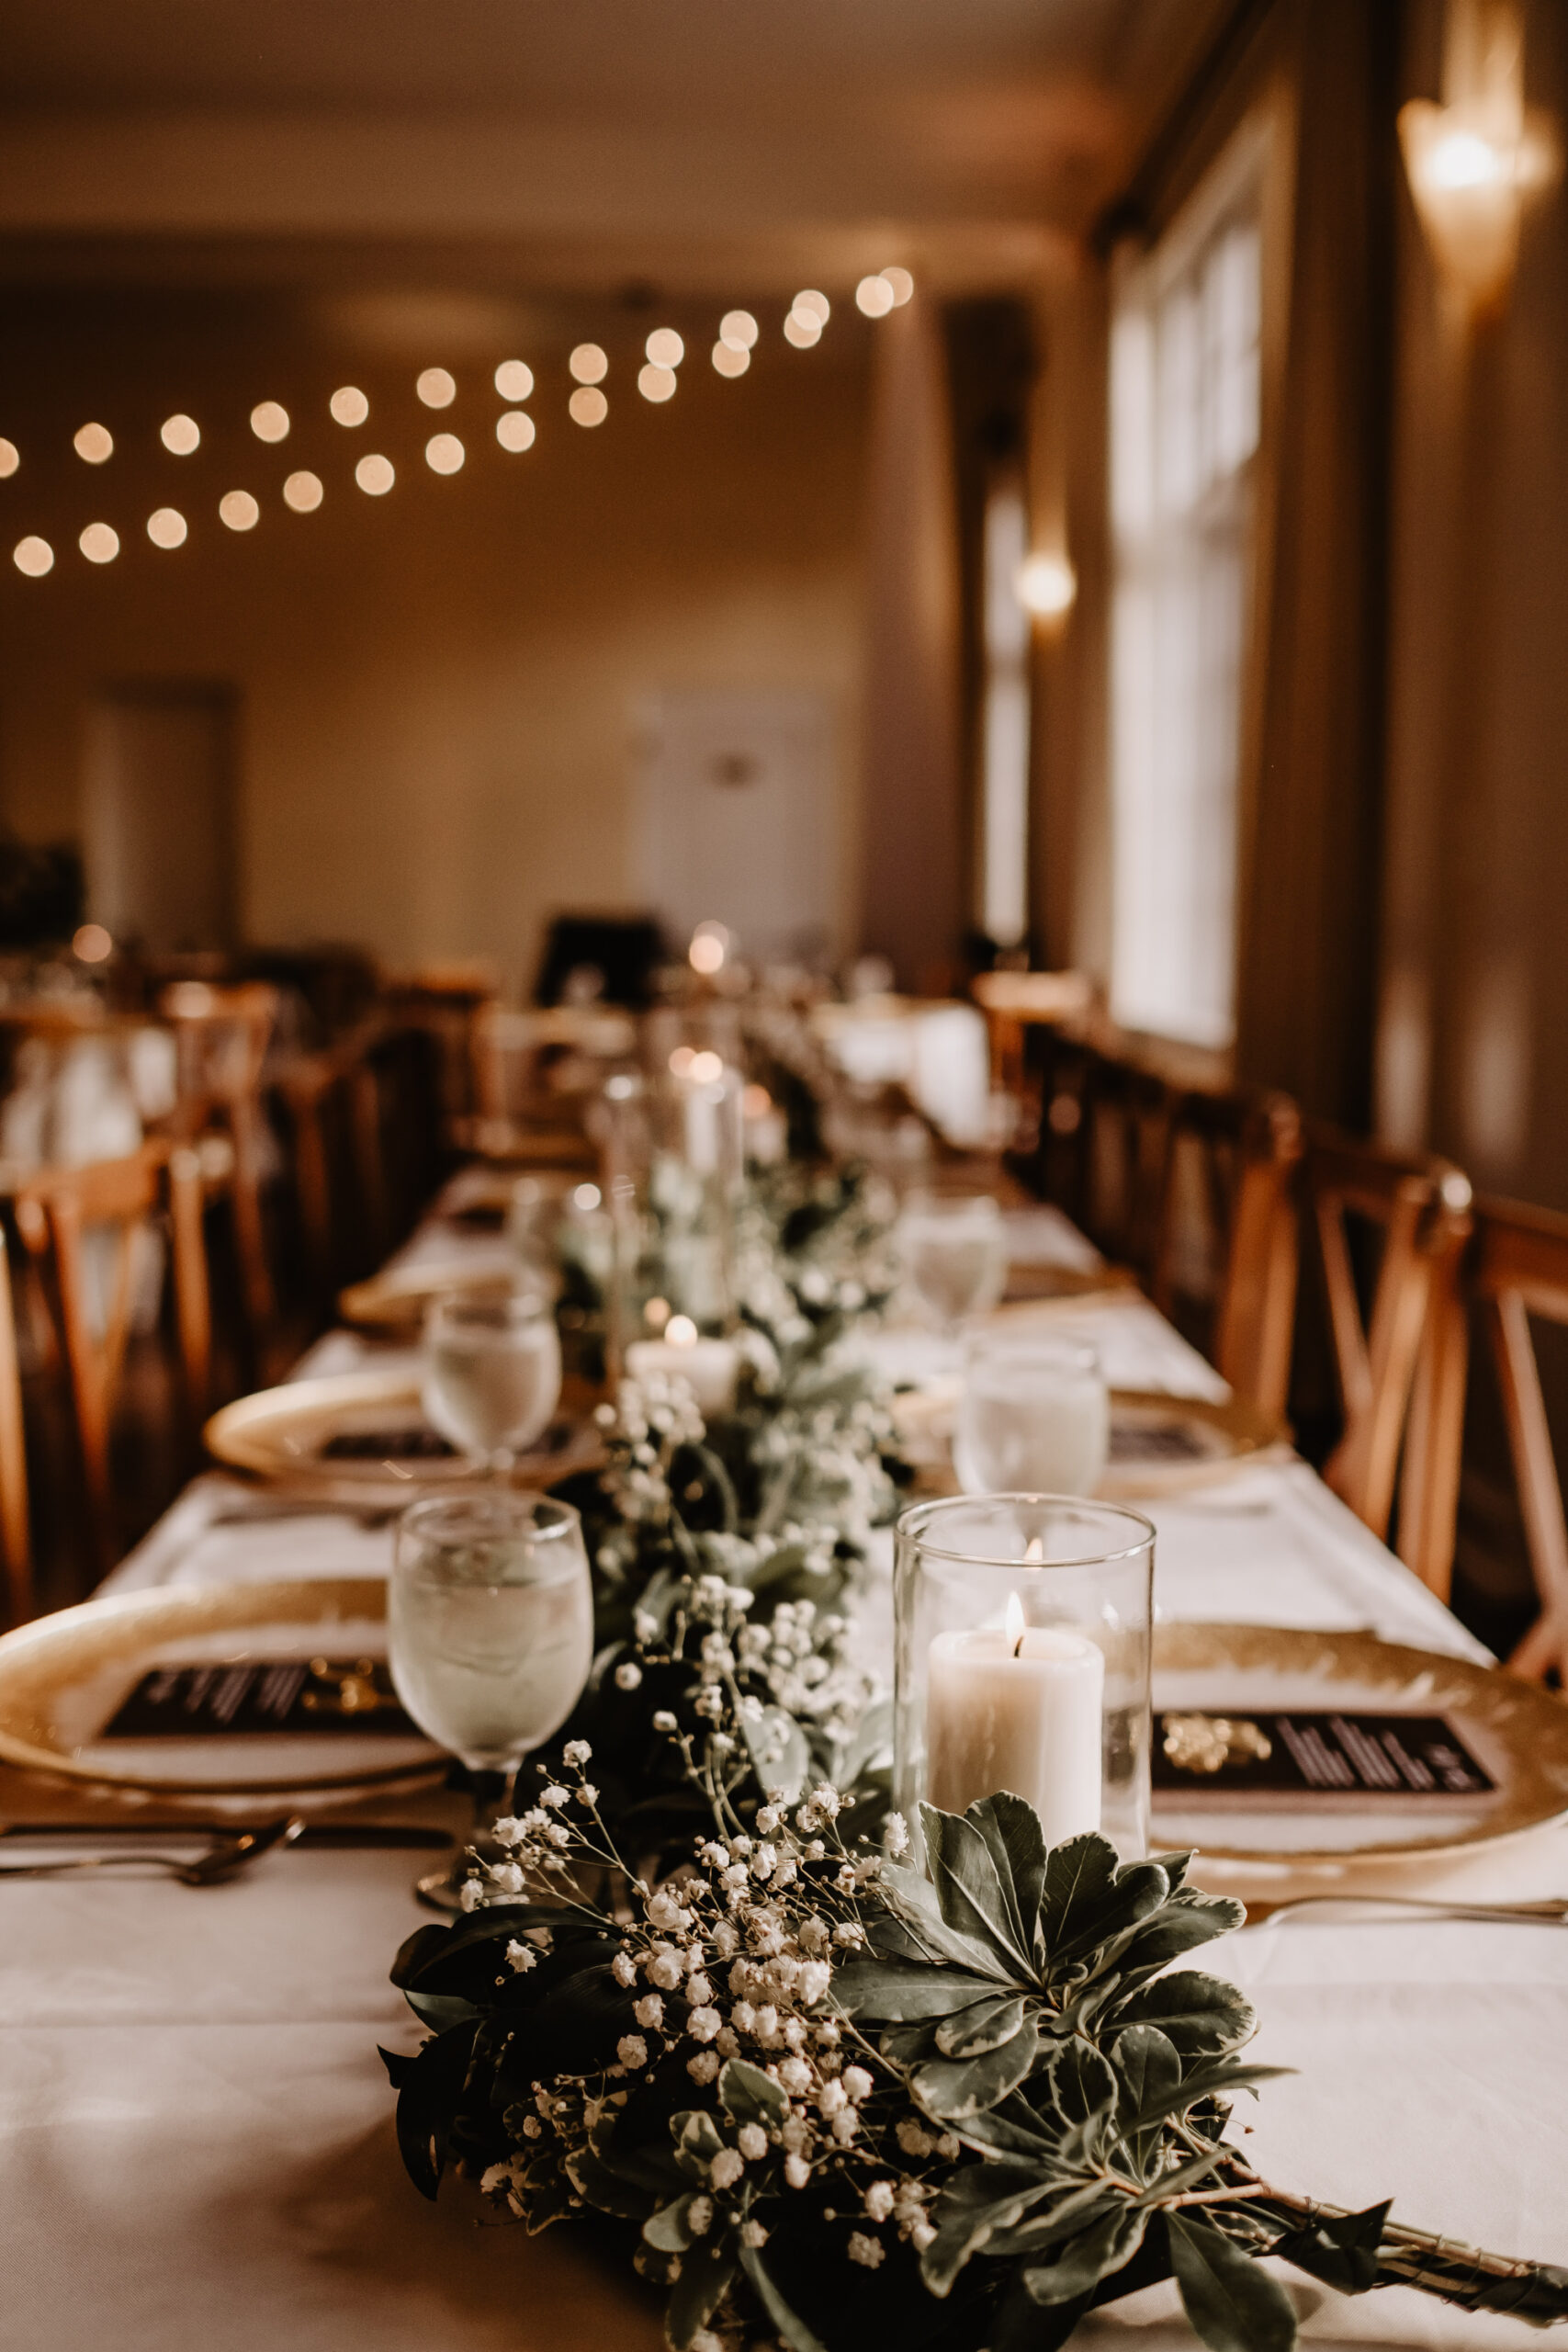 Neutral Boho Modern Wedding Reception Decor, Long Feasting Table with White Linens, Wooden Cross Back Chairs, Greenery and Baby's Breathe Table Runner Garland | Tampa Bay Wedding Planner Taylored Affairs